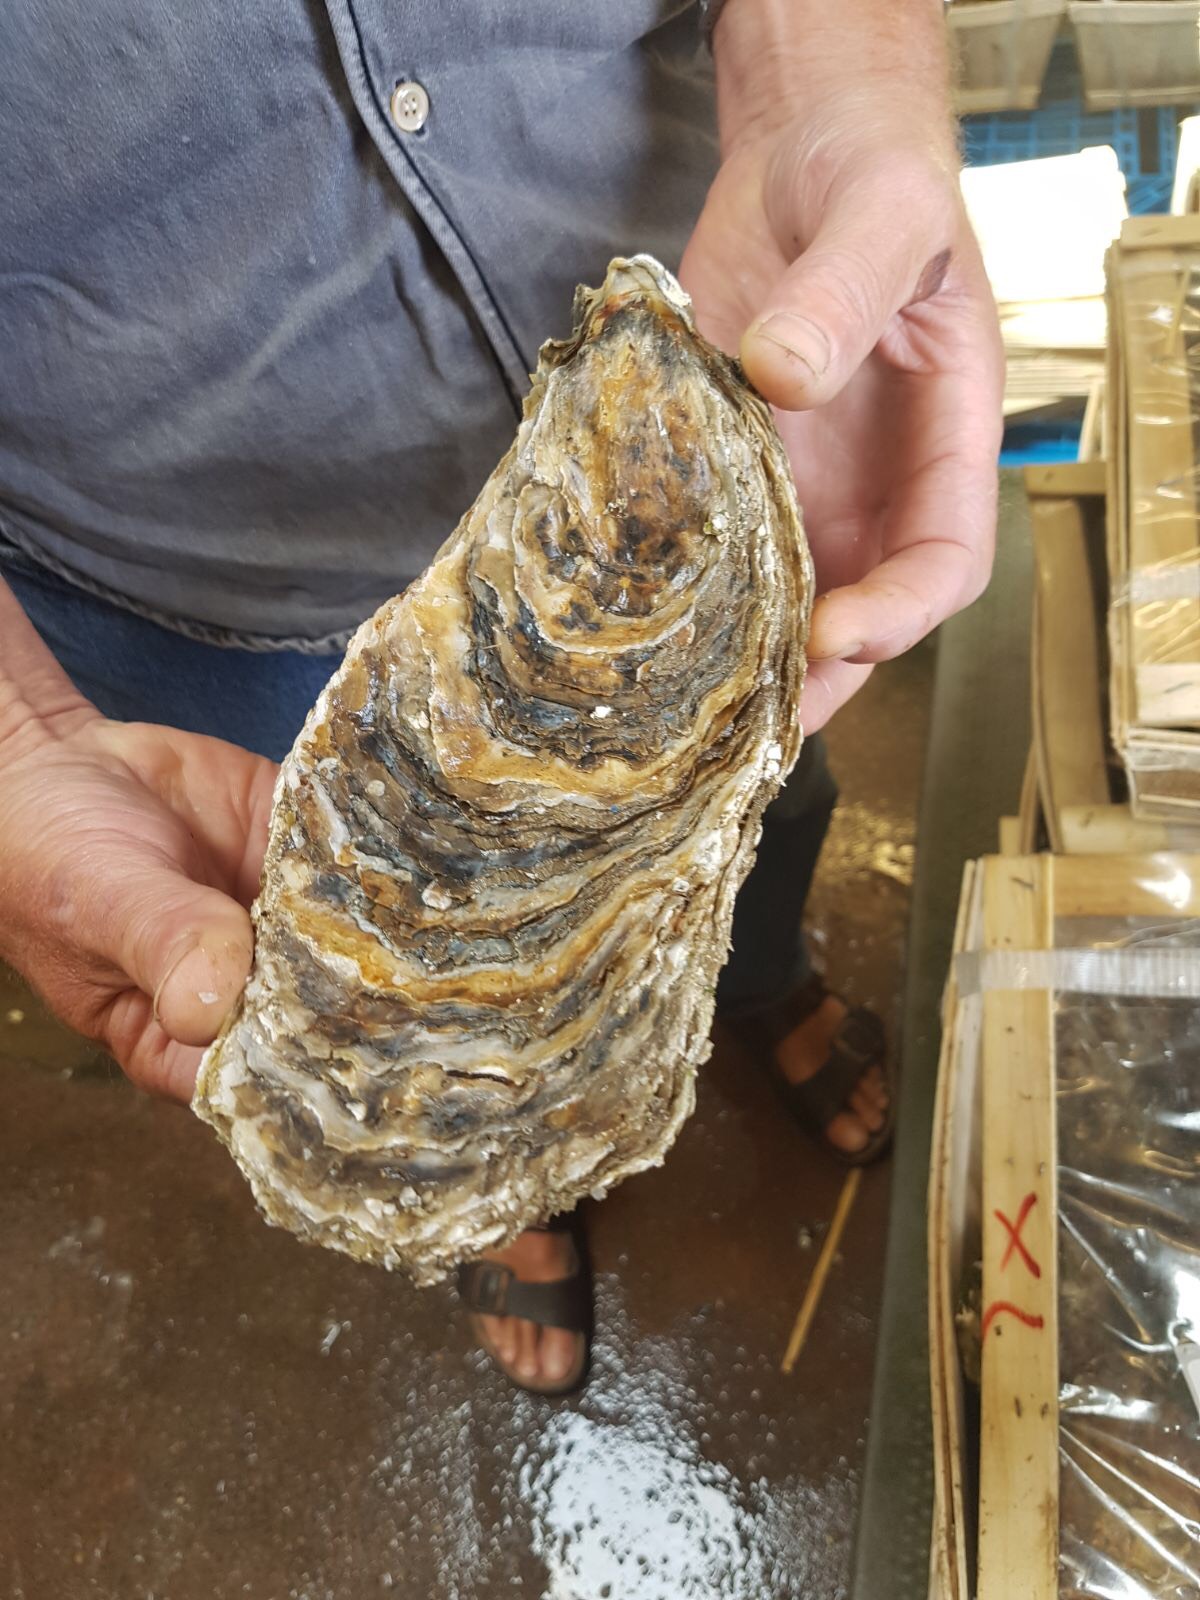 Jonathan holding a large rock oyster